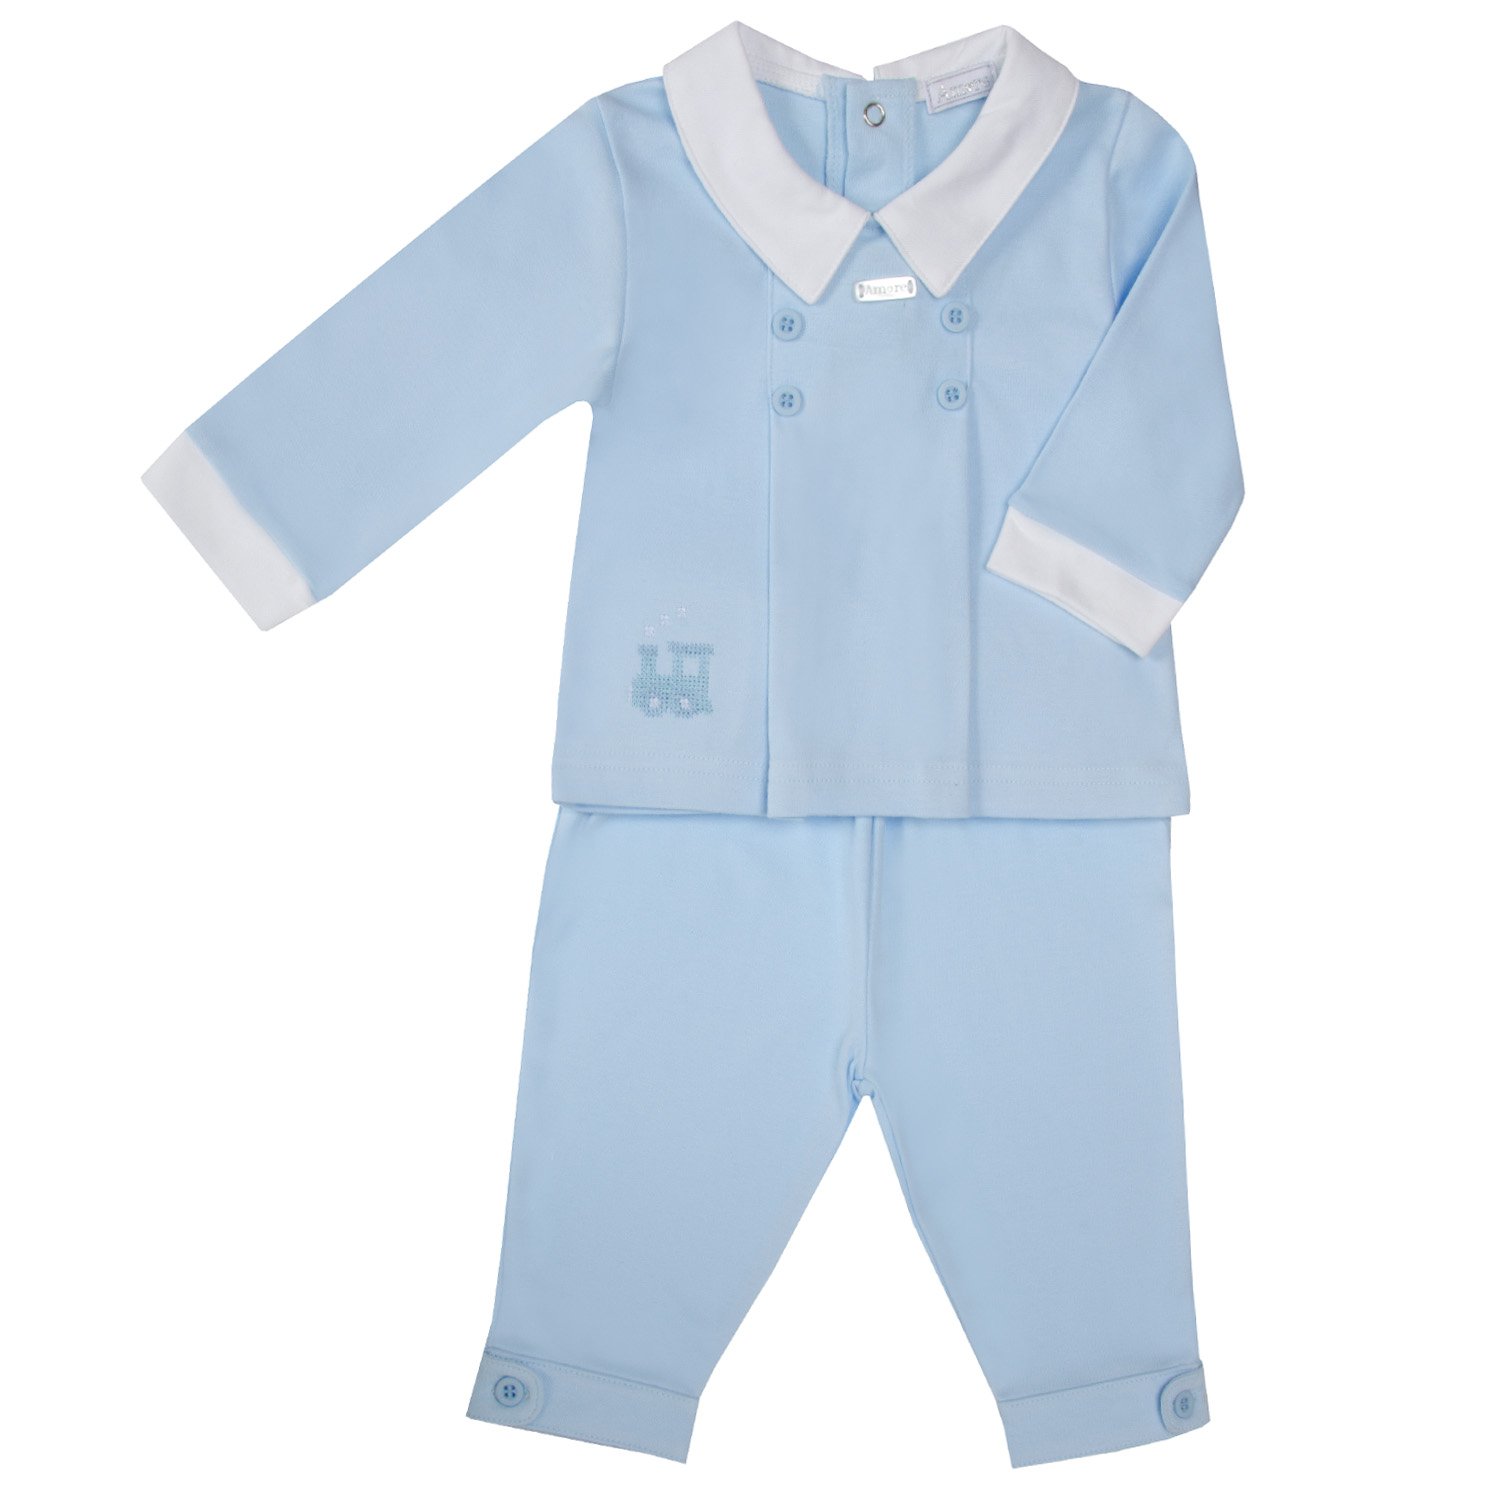 Amore Classic Train Boys Top & Trousers 5021